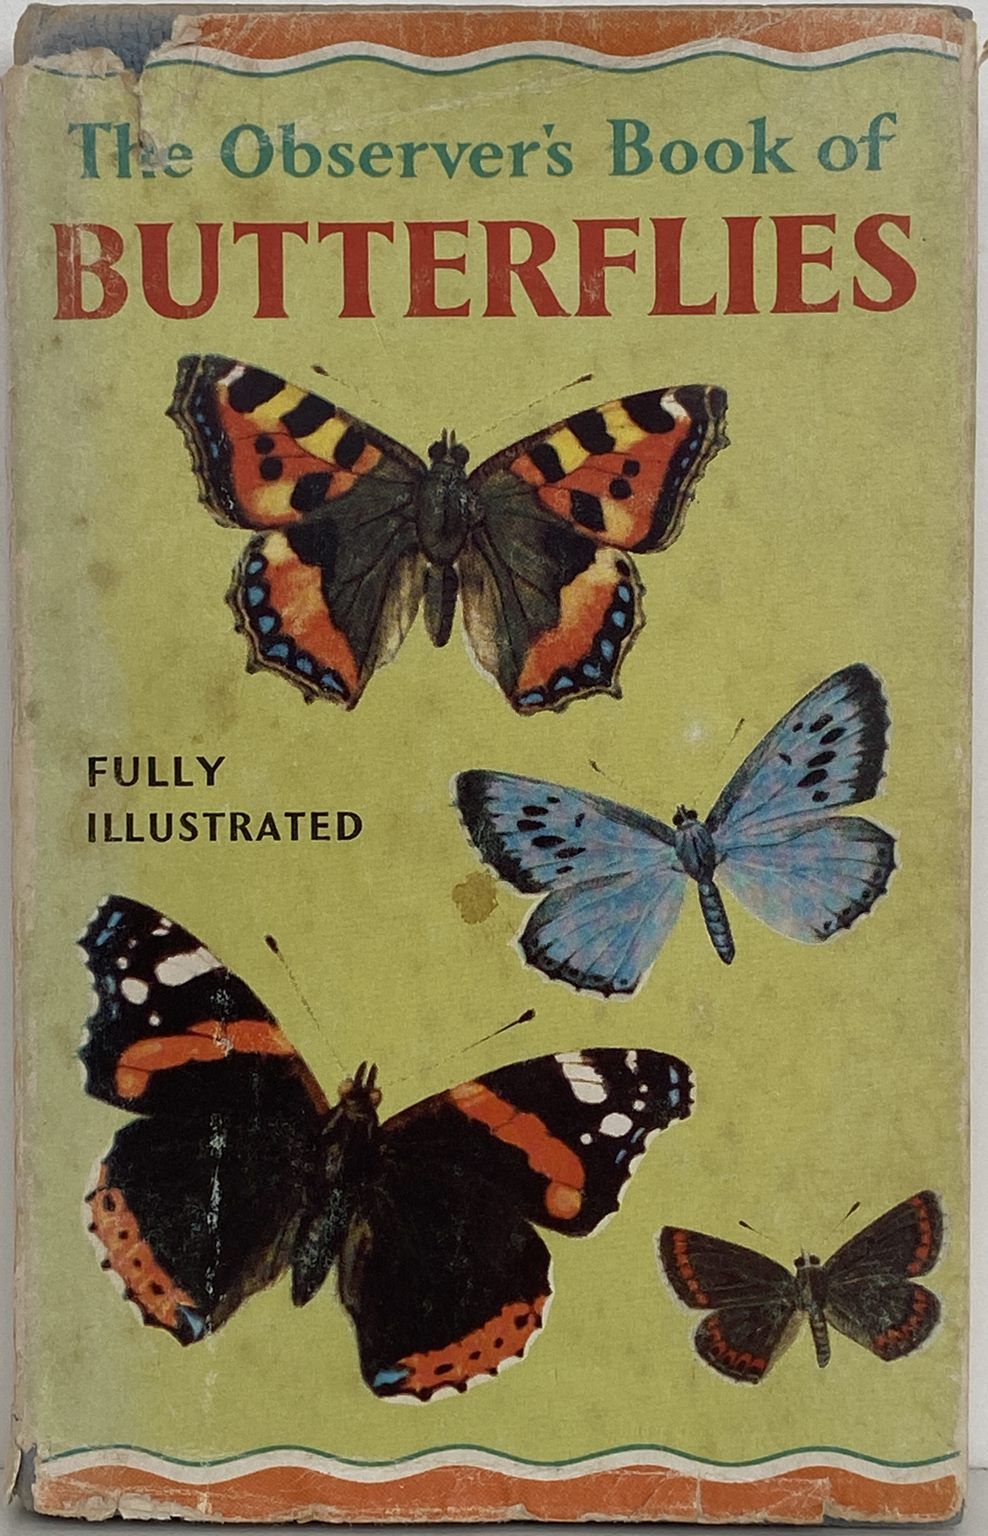 The Observer's Book of BUTTERFLIES